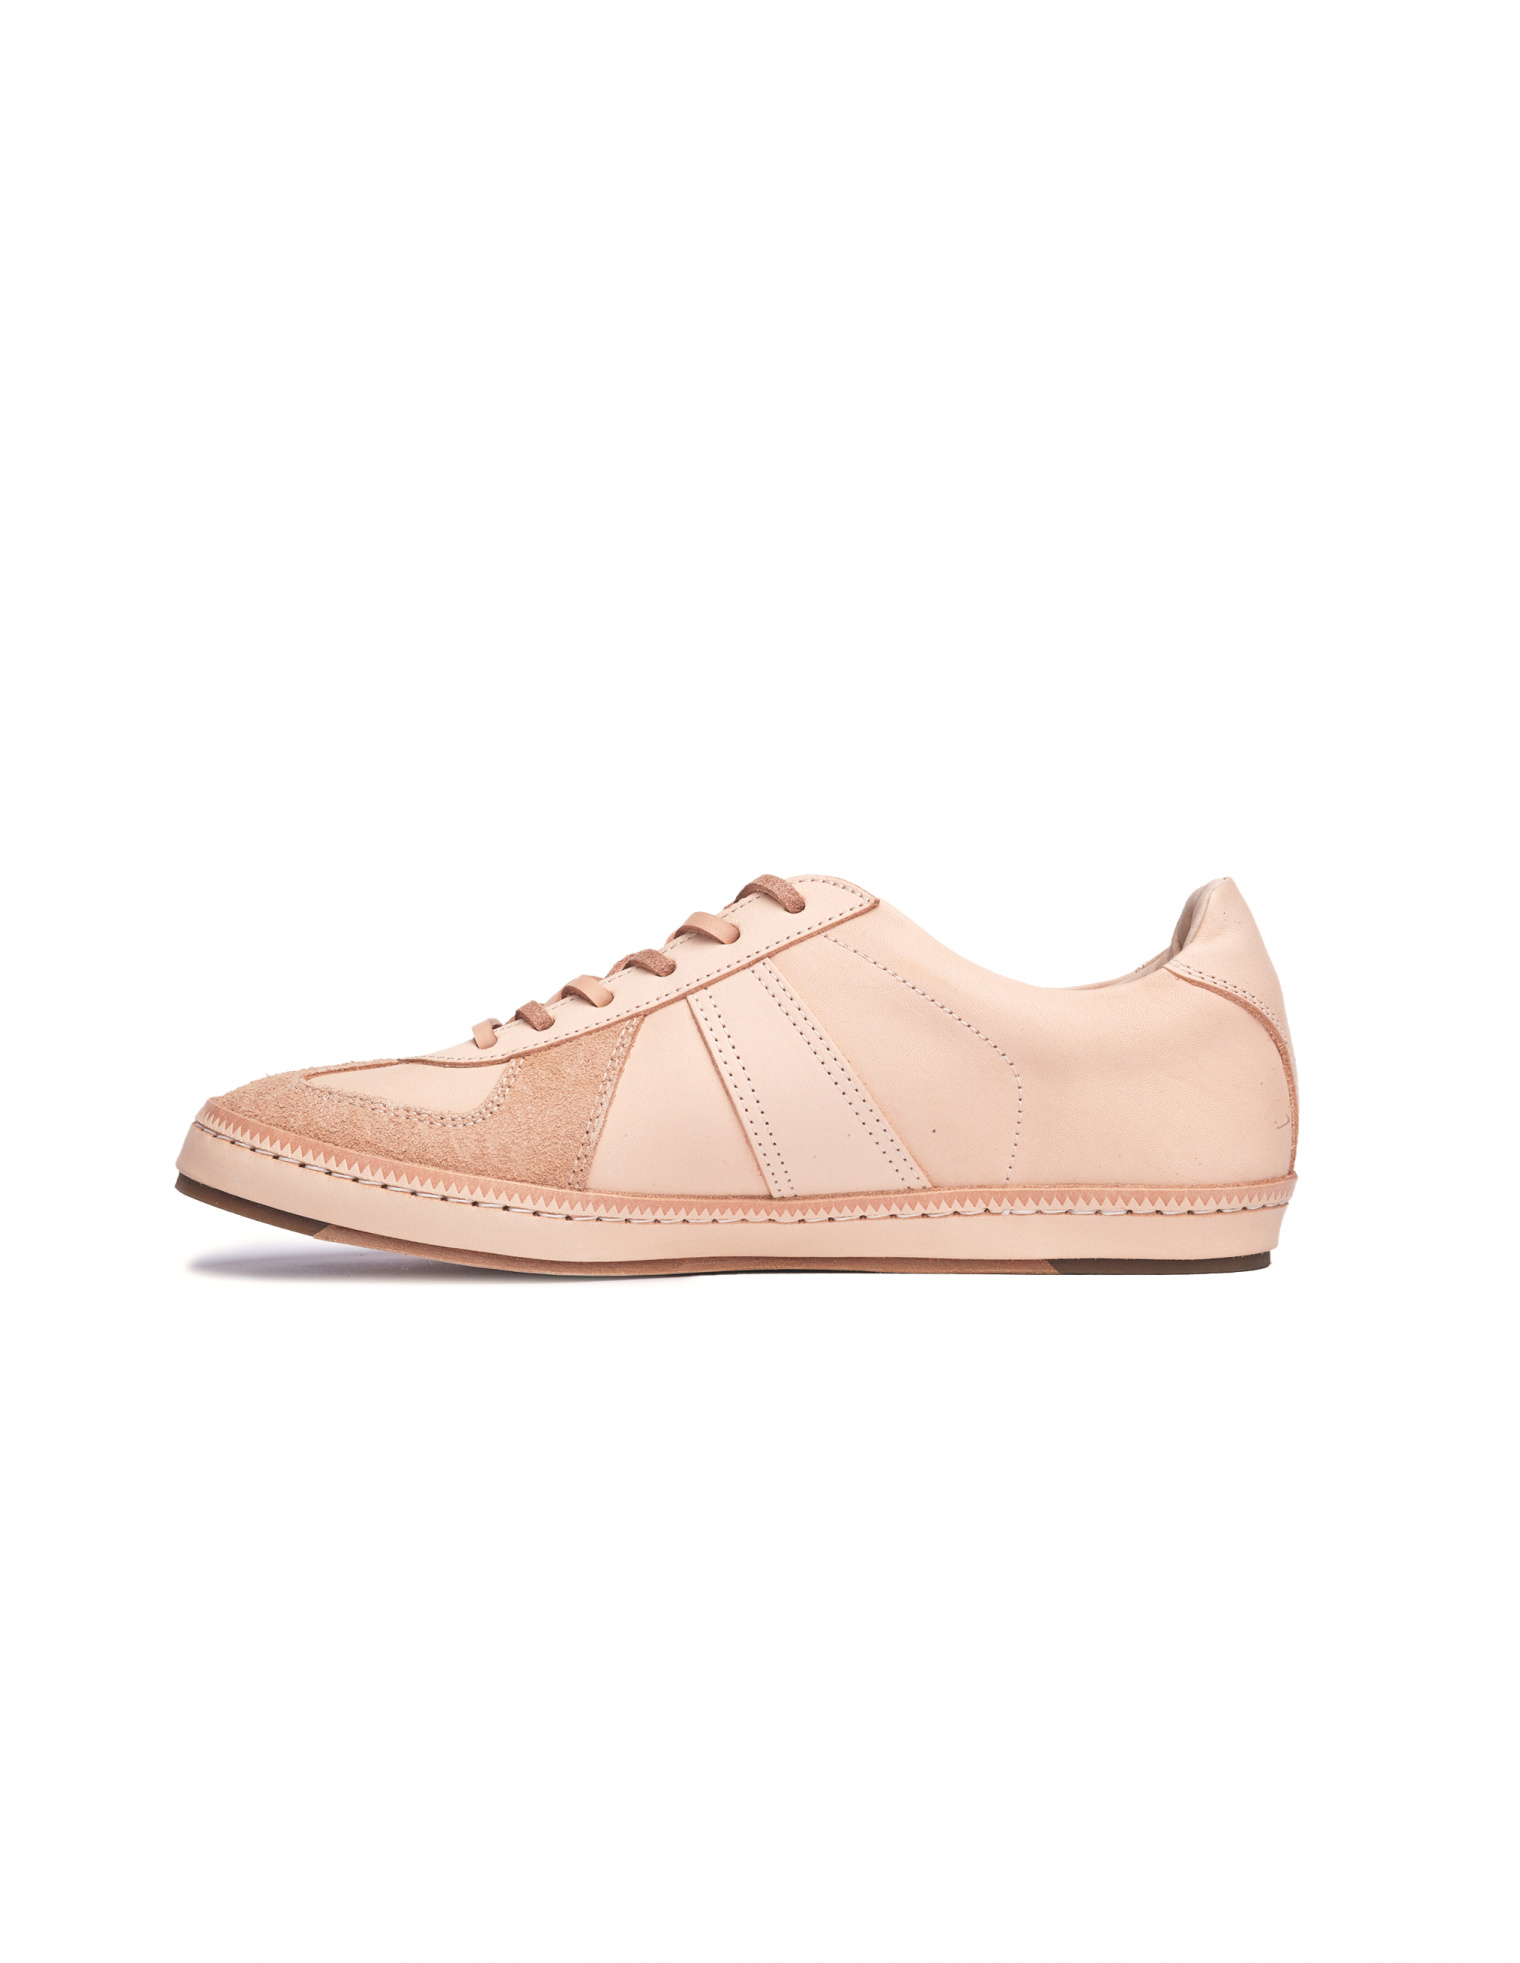 Hender Scheme Manual Indistrial Products 05 Sneakers